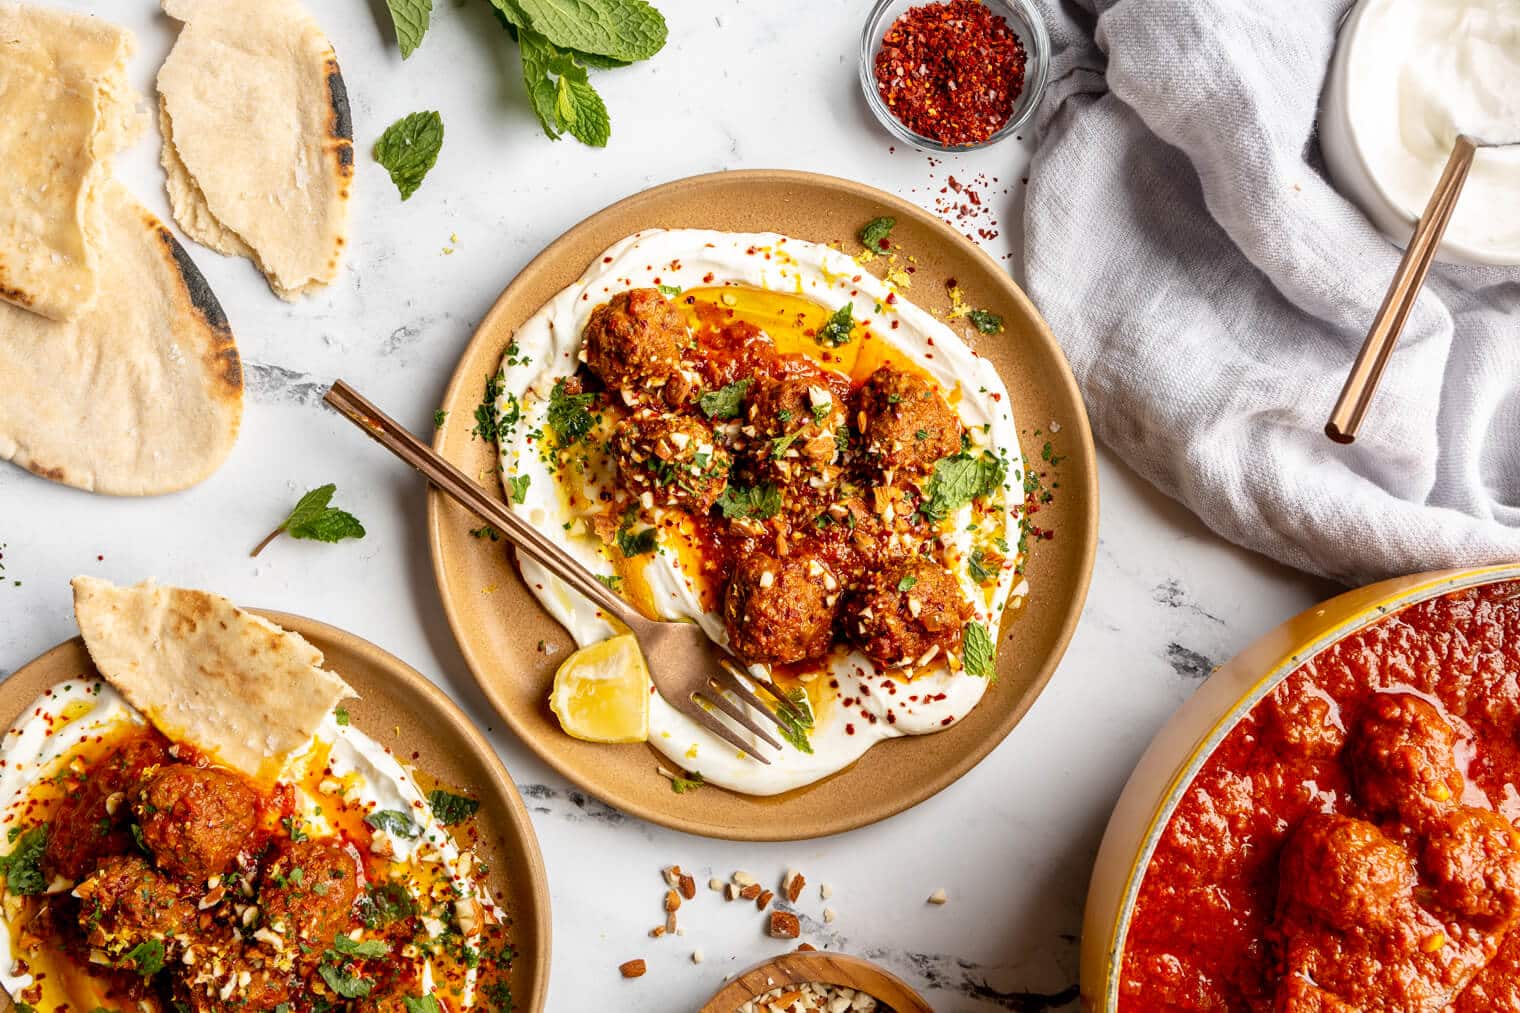 A plate of Moroccan-inspired meatballs on a bed of greek yogurt and garnished with parsley, lemon, and sauce on a white and black marble surface. There are basil leaves, pita breads, a linen, and another plate of meatballs on the table.